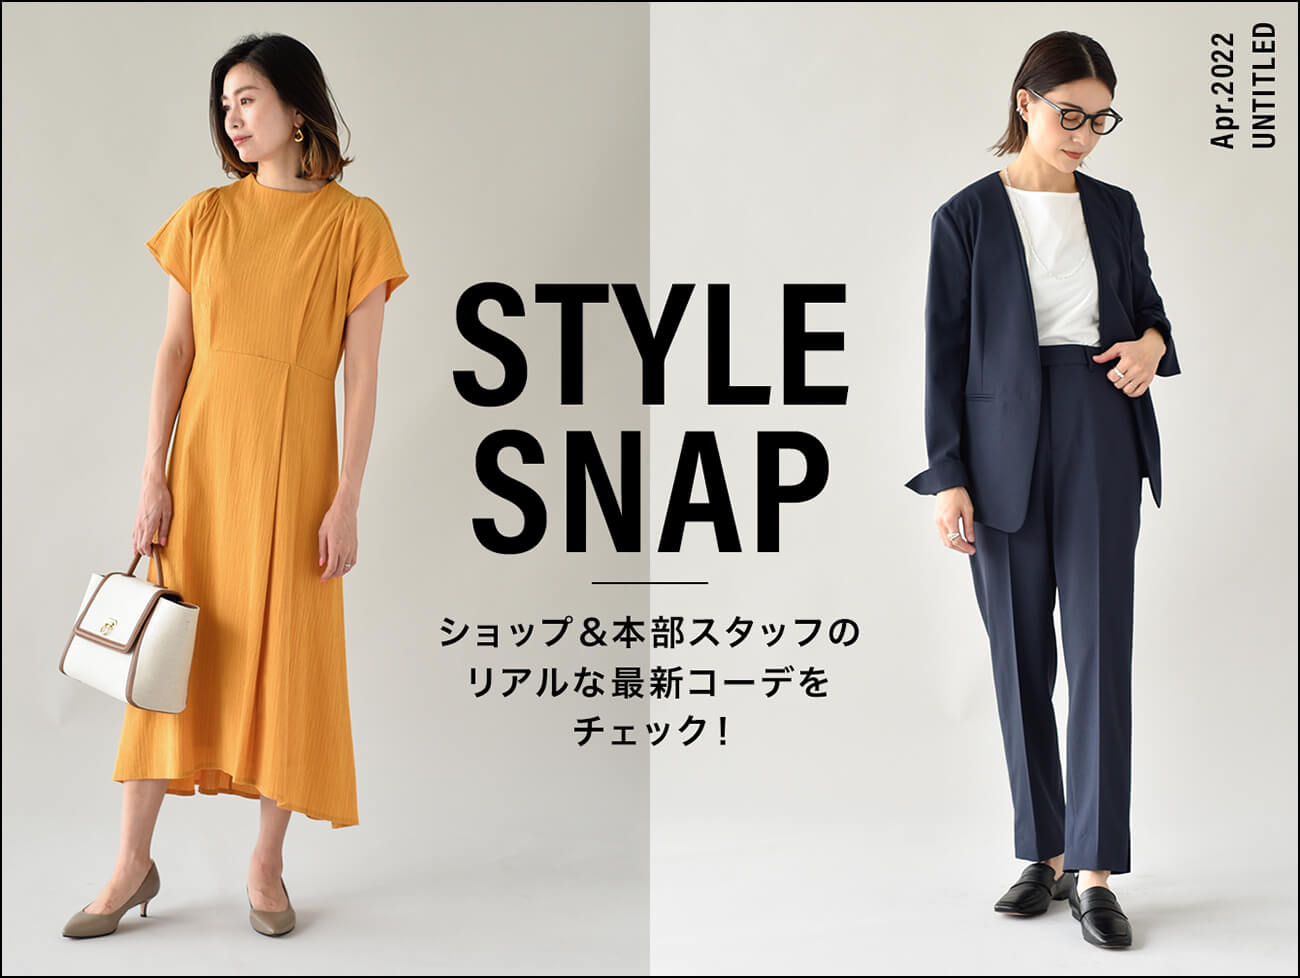 STYLE SNAP